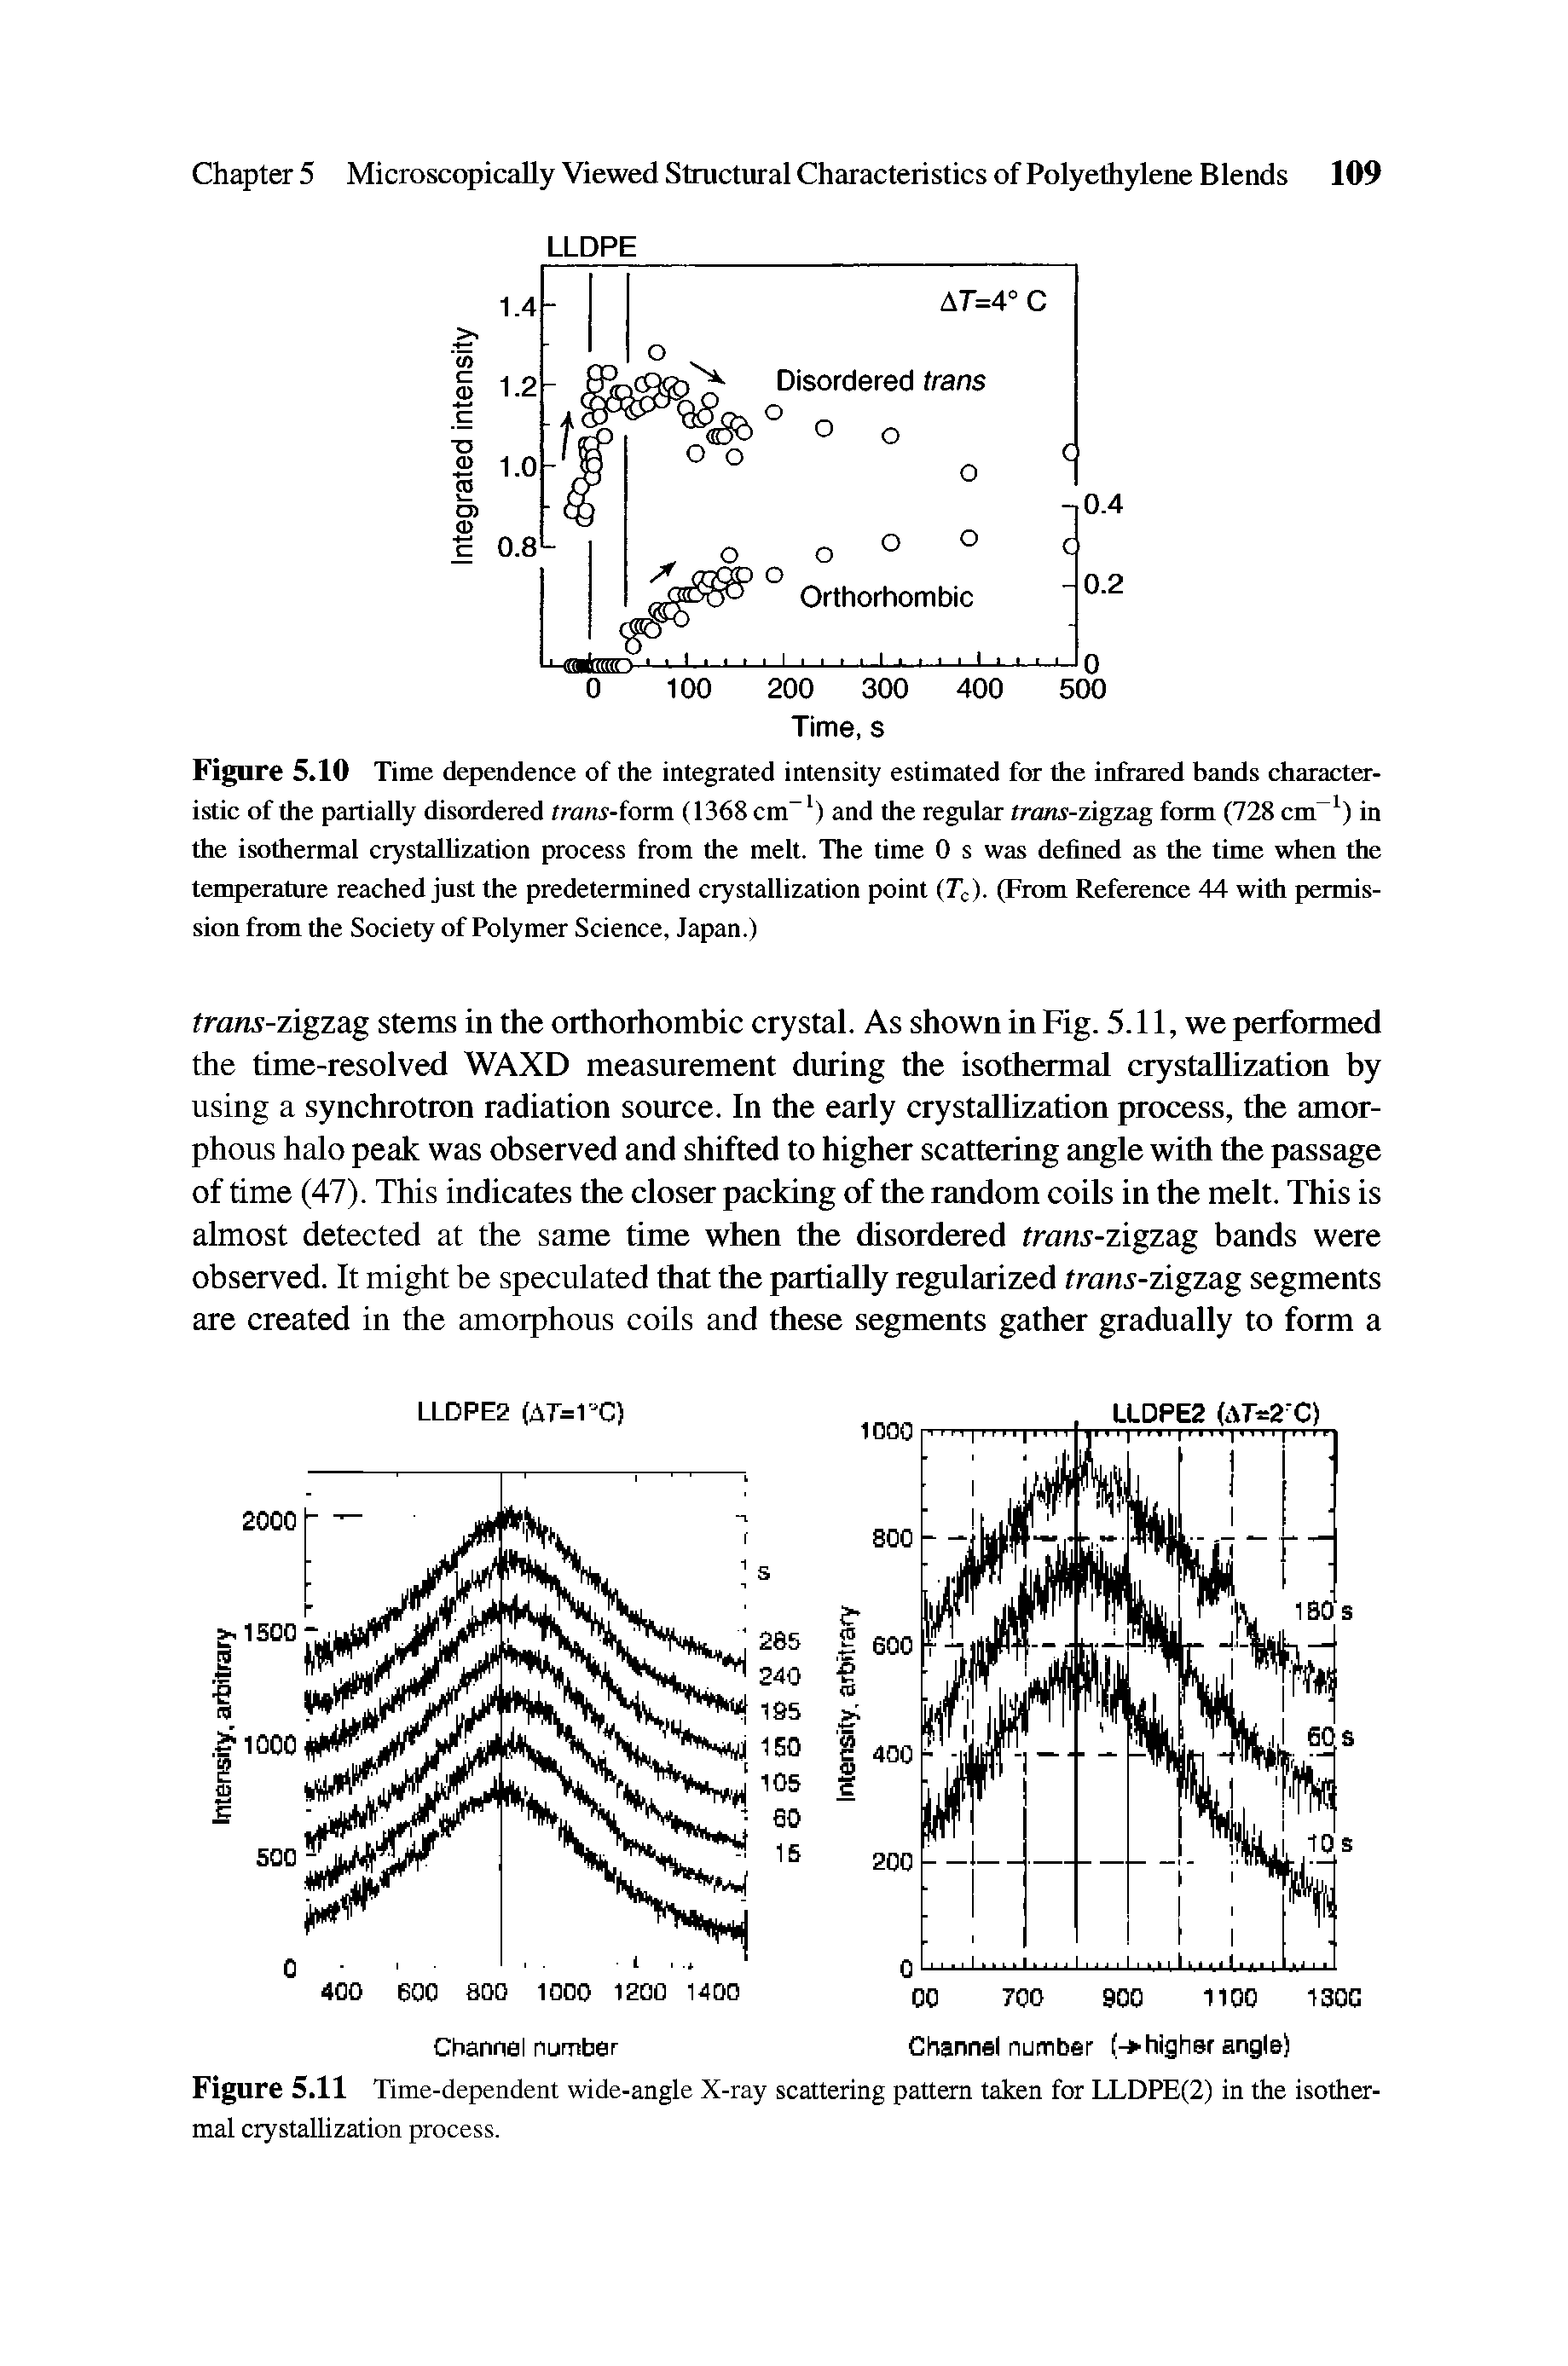 Figure 5.10 Time dependence of the integrated intensity estimated for the infrared bands characteristic of the partially disordered trans-form (1368cm ) and the regular trans-zigzag form (728 cm ) in the isothermal crystallization process from the melt. The time 0 s was defined as the time when the temperature reached just the predetermined crystallization point (Tc). (From Reference 44 with permission from the Society of Polymer Science, Japan.)...